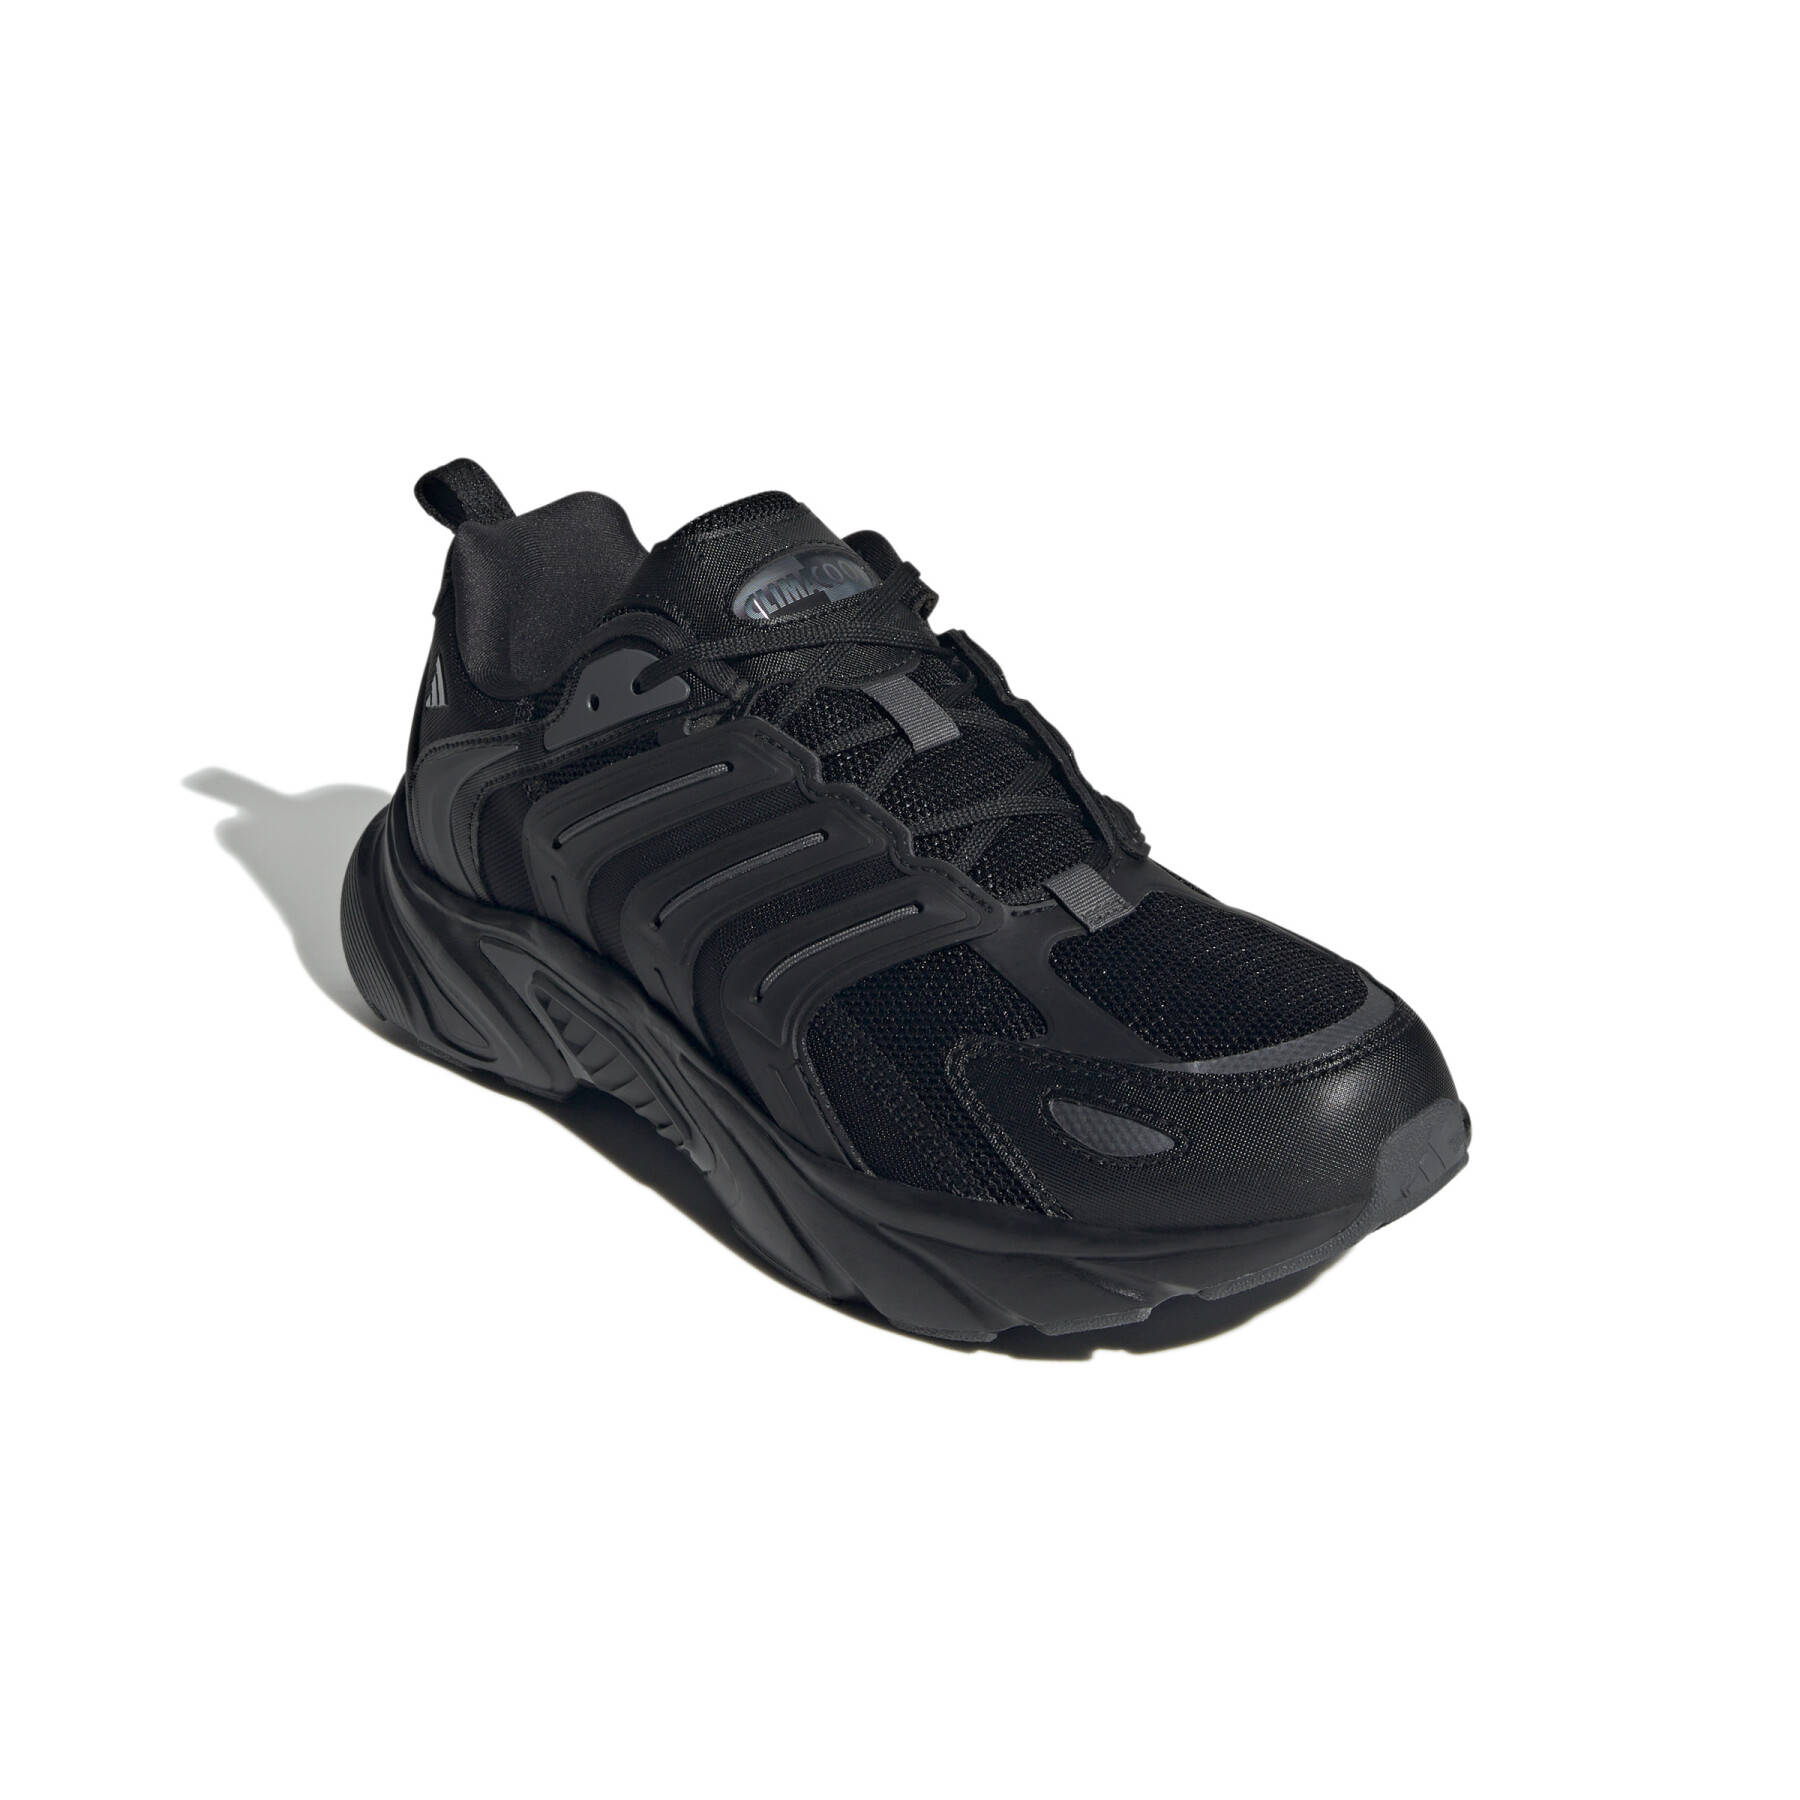 Running shoes adidas Climacool Ventania